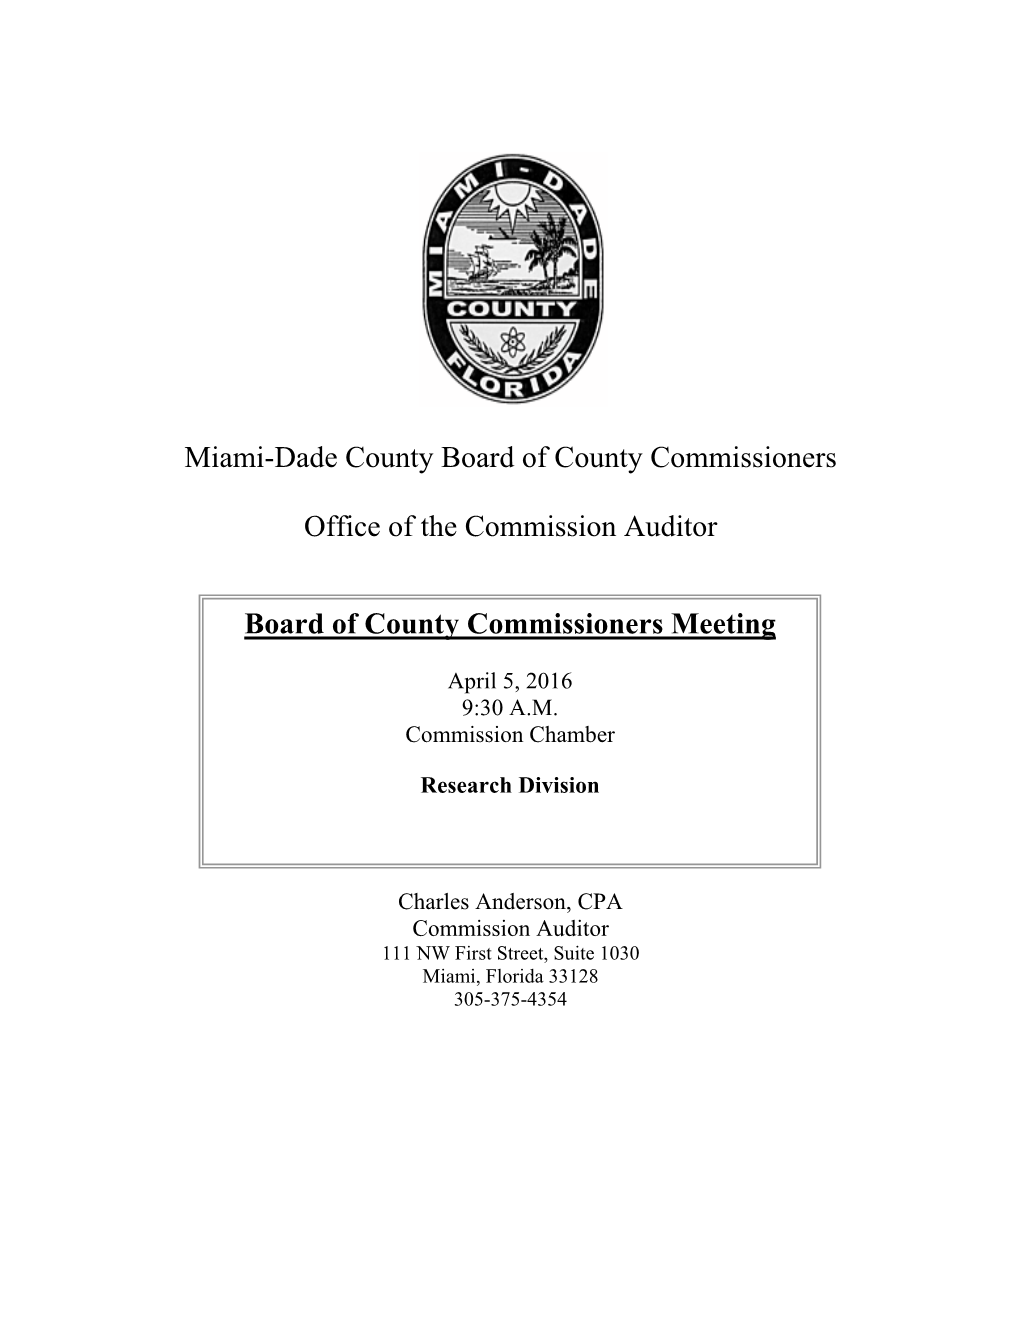 Board of County Commissioners Meeting